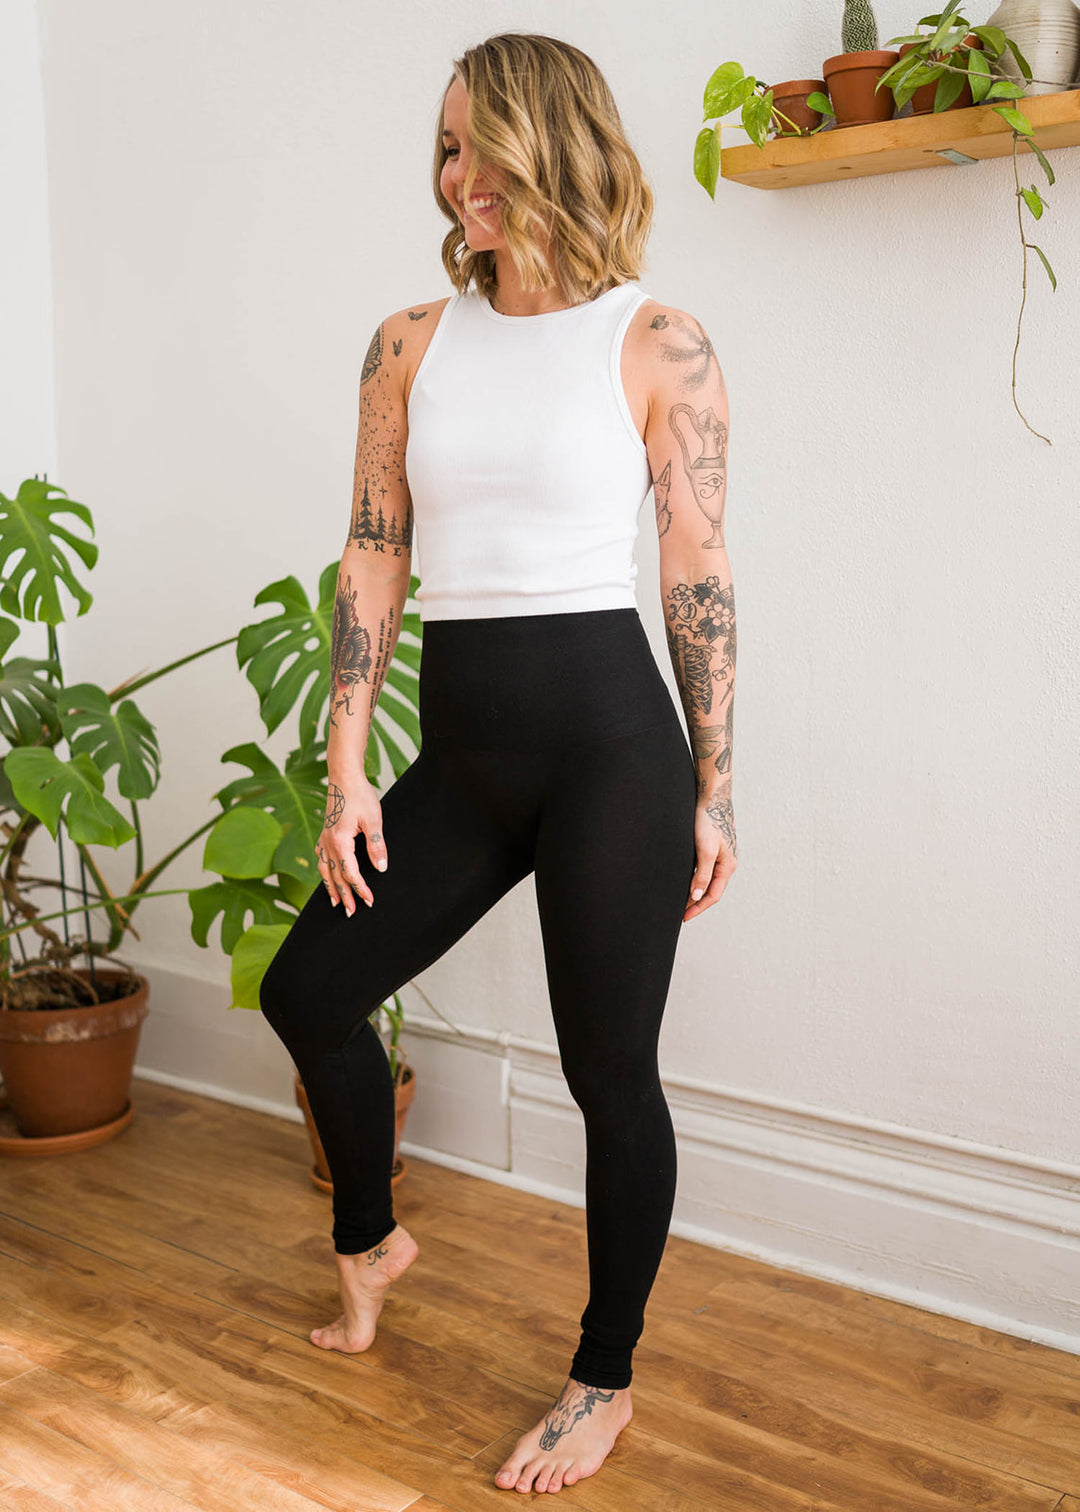 High rise black bamboo leggings for yoga and lounging